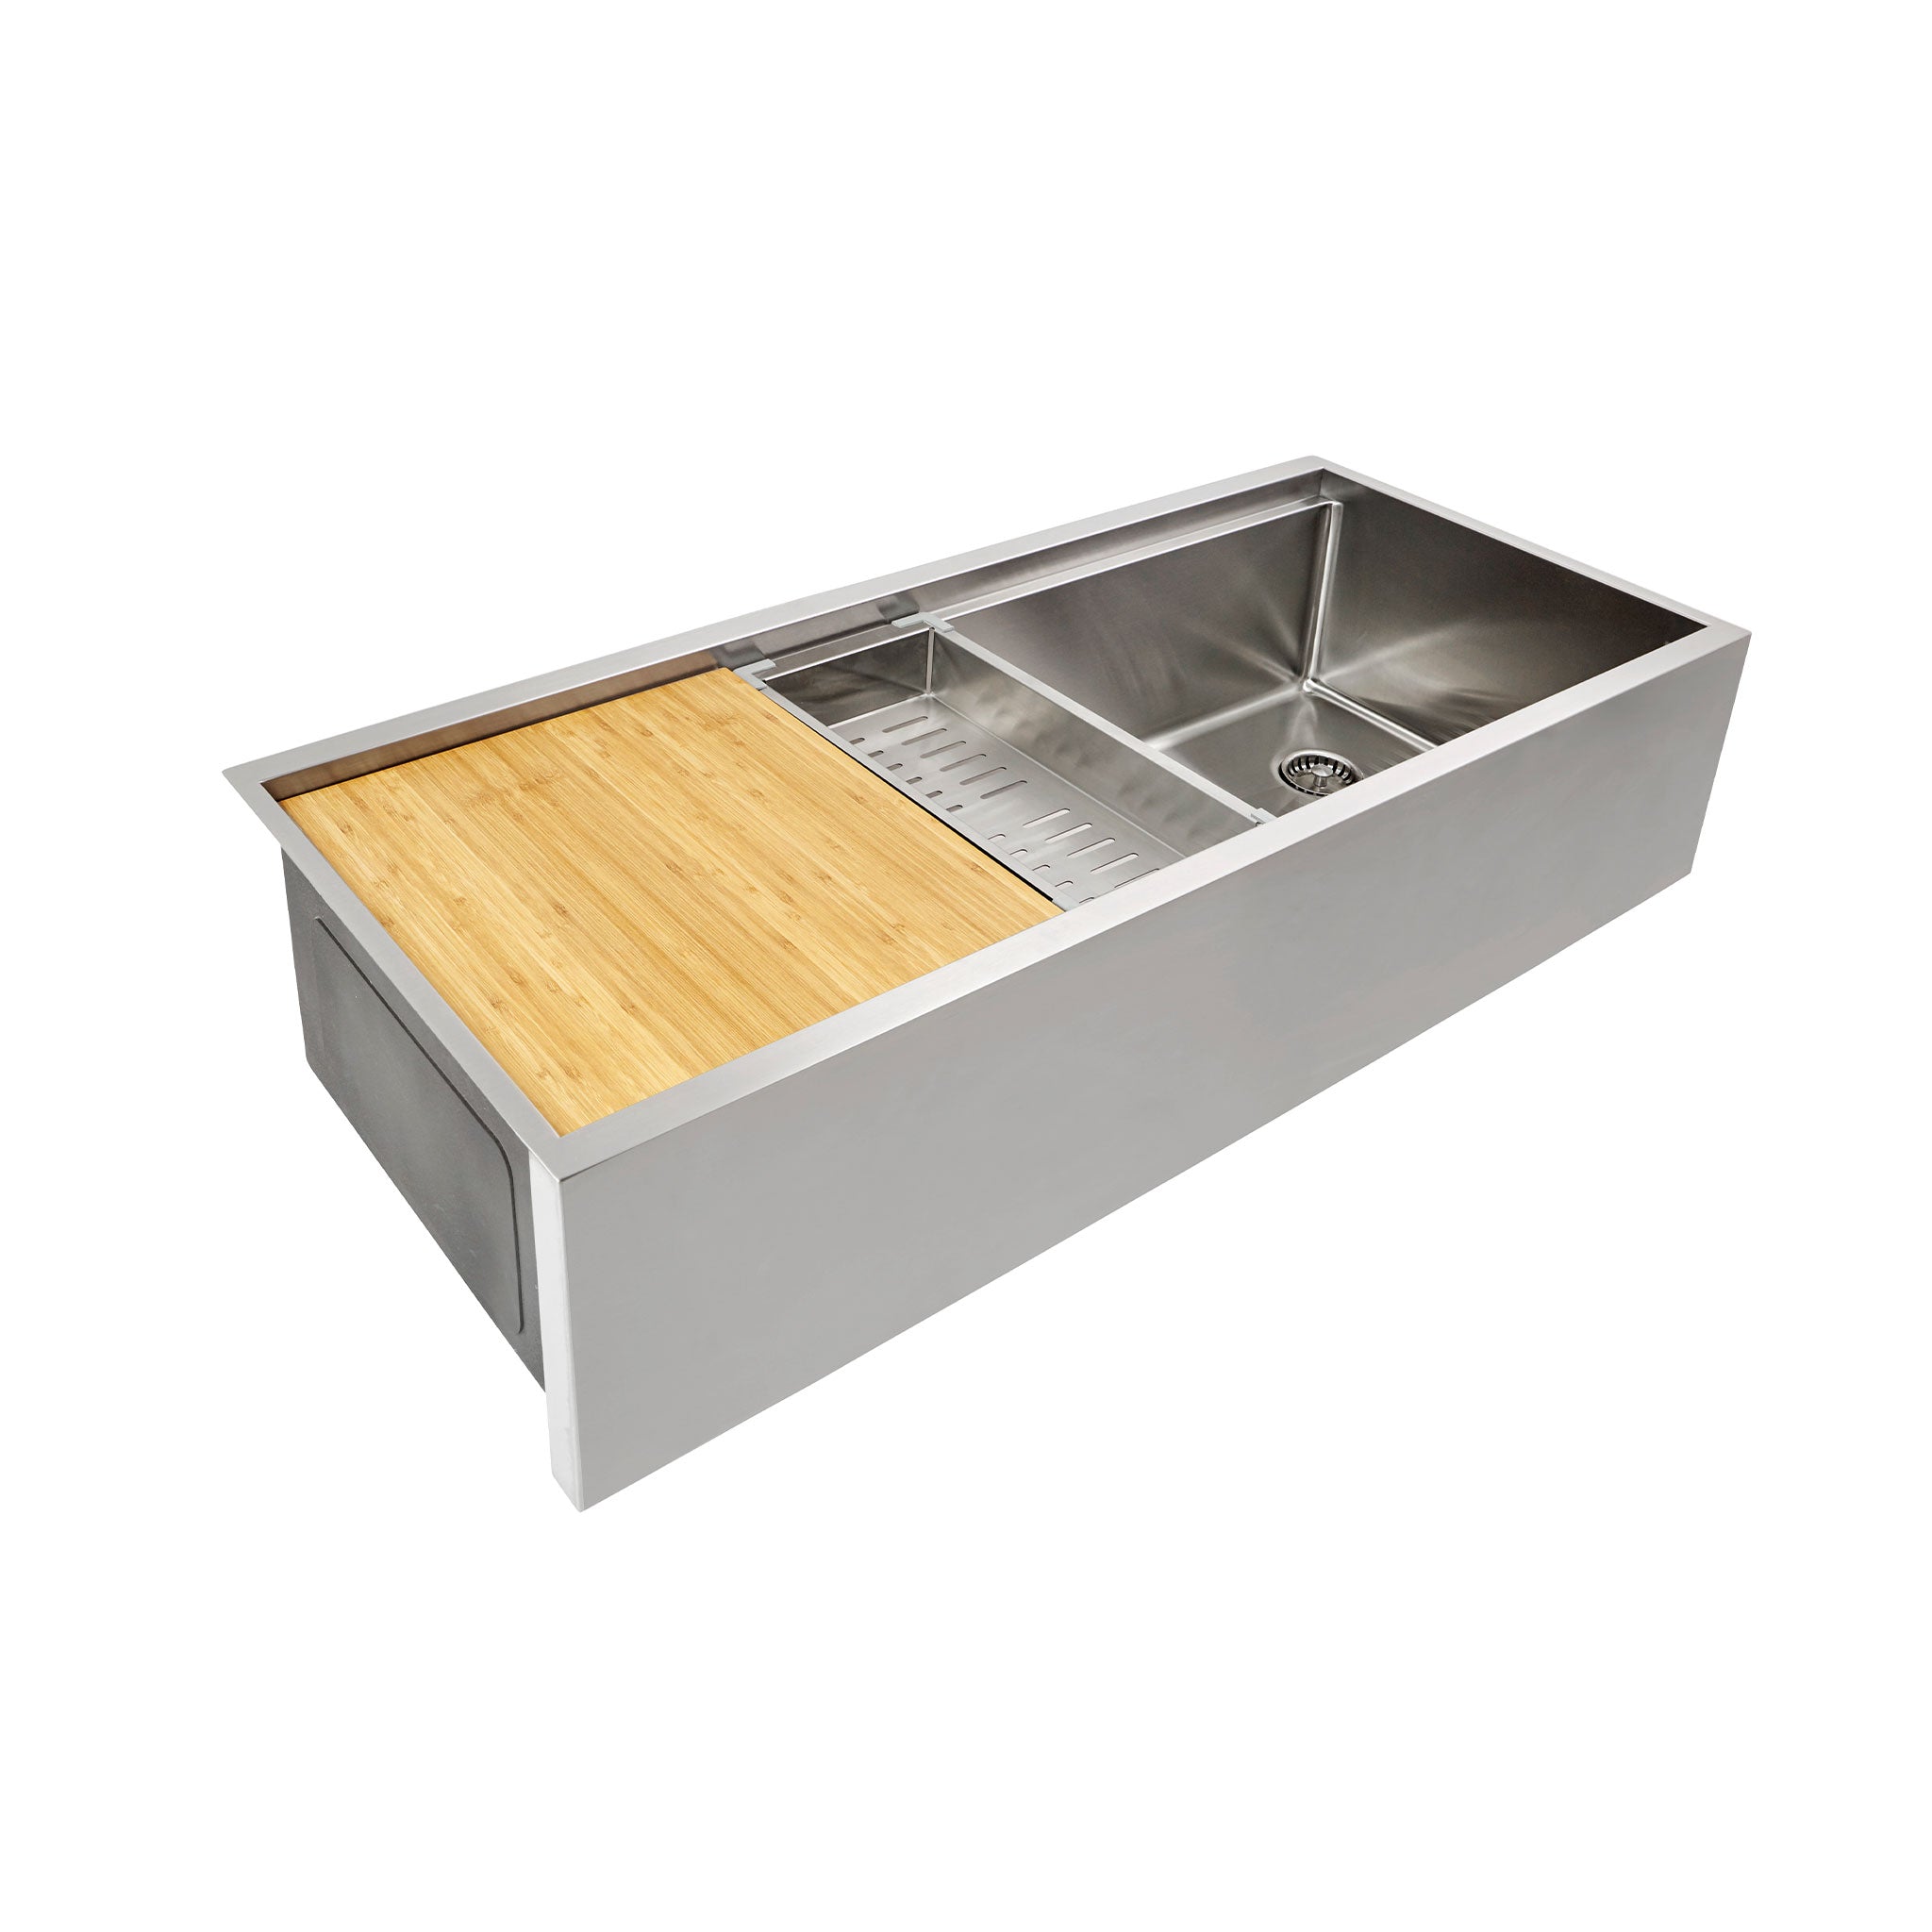 The patented seamless drain design from Create Good Sinks in a single basin farmhouse style 46” kitchen sink